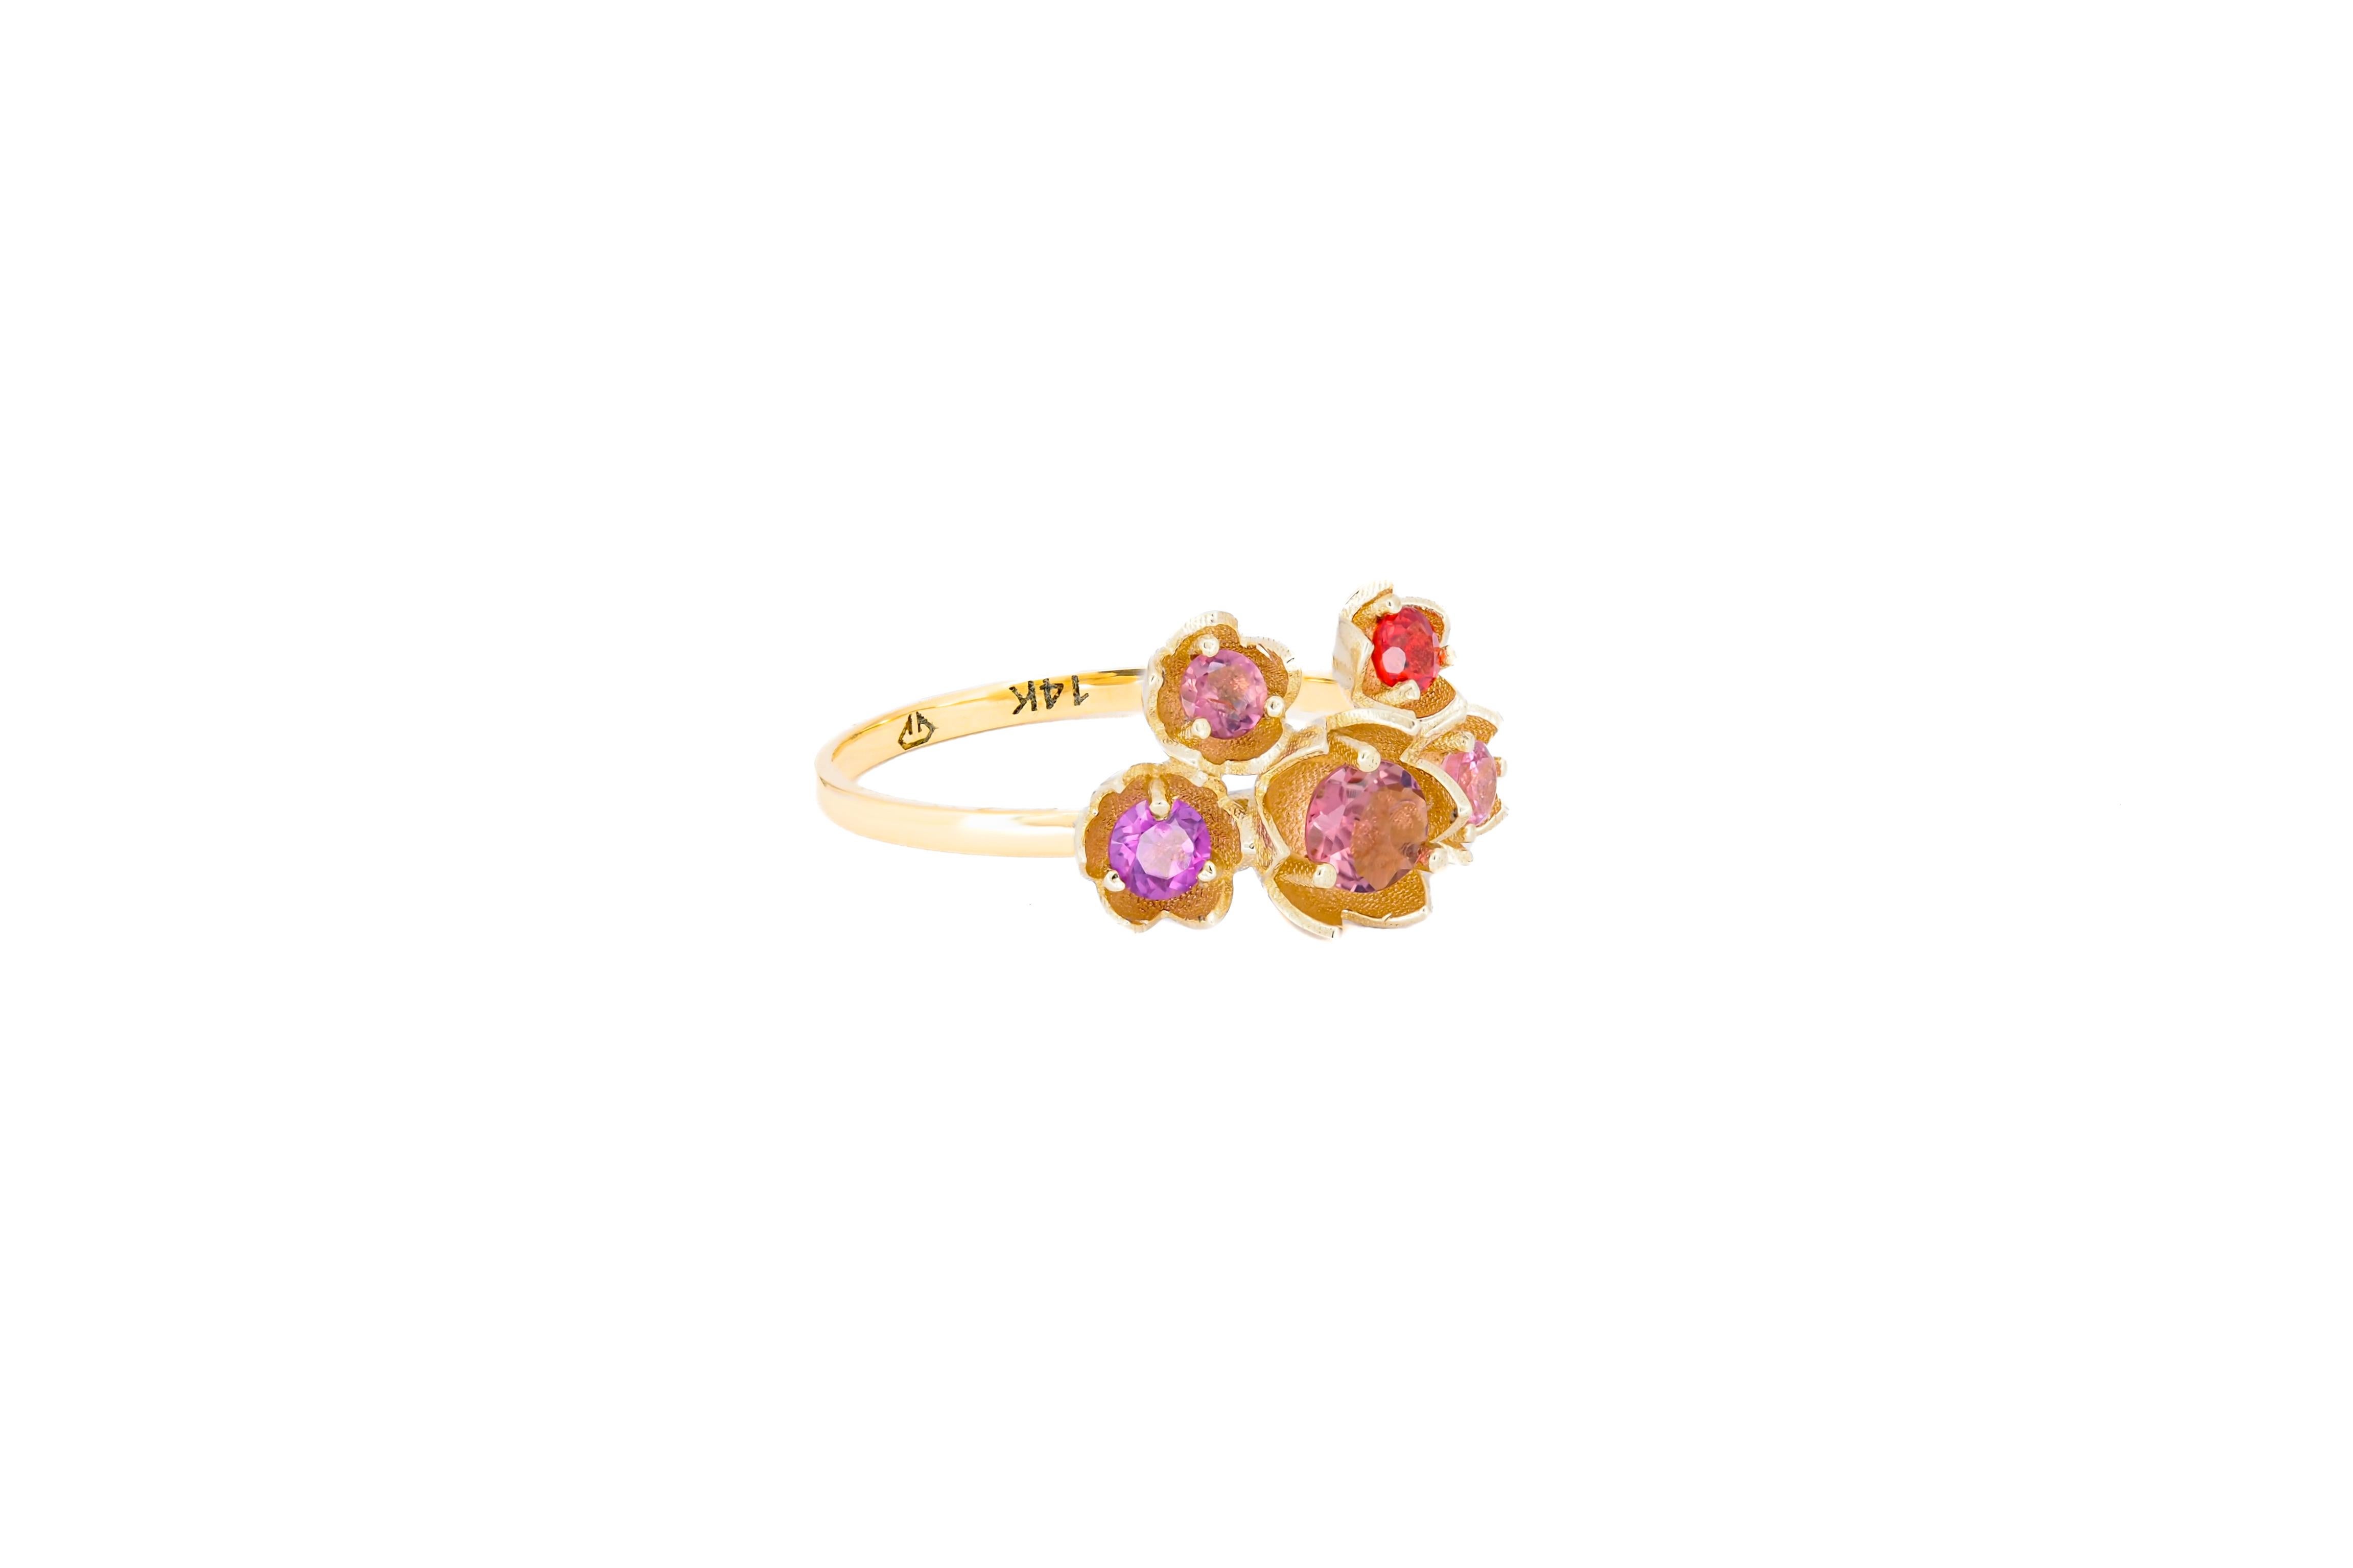 For Sale:  14 karat gold Blossom ring with multicolored gemstones. Pink Tourmaline ring 2